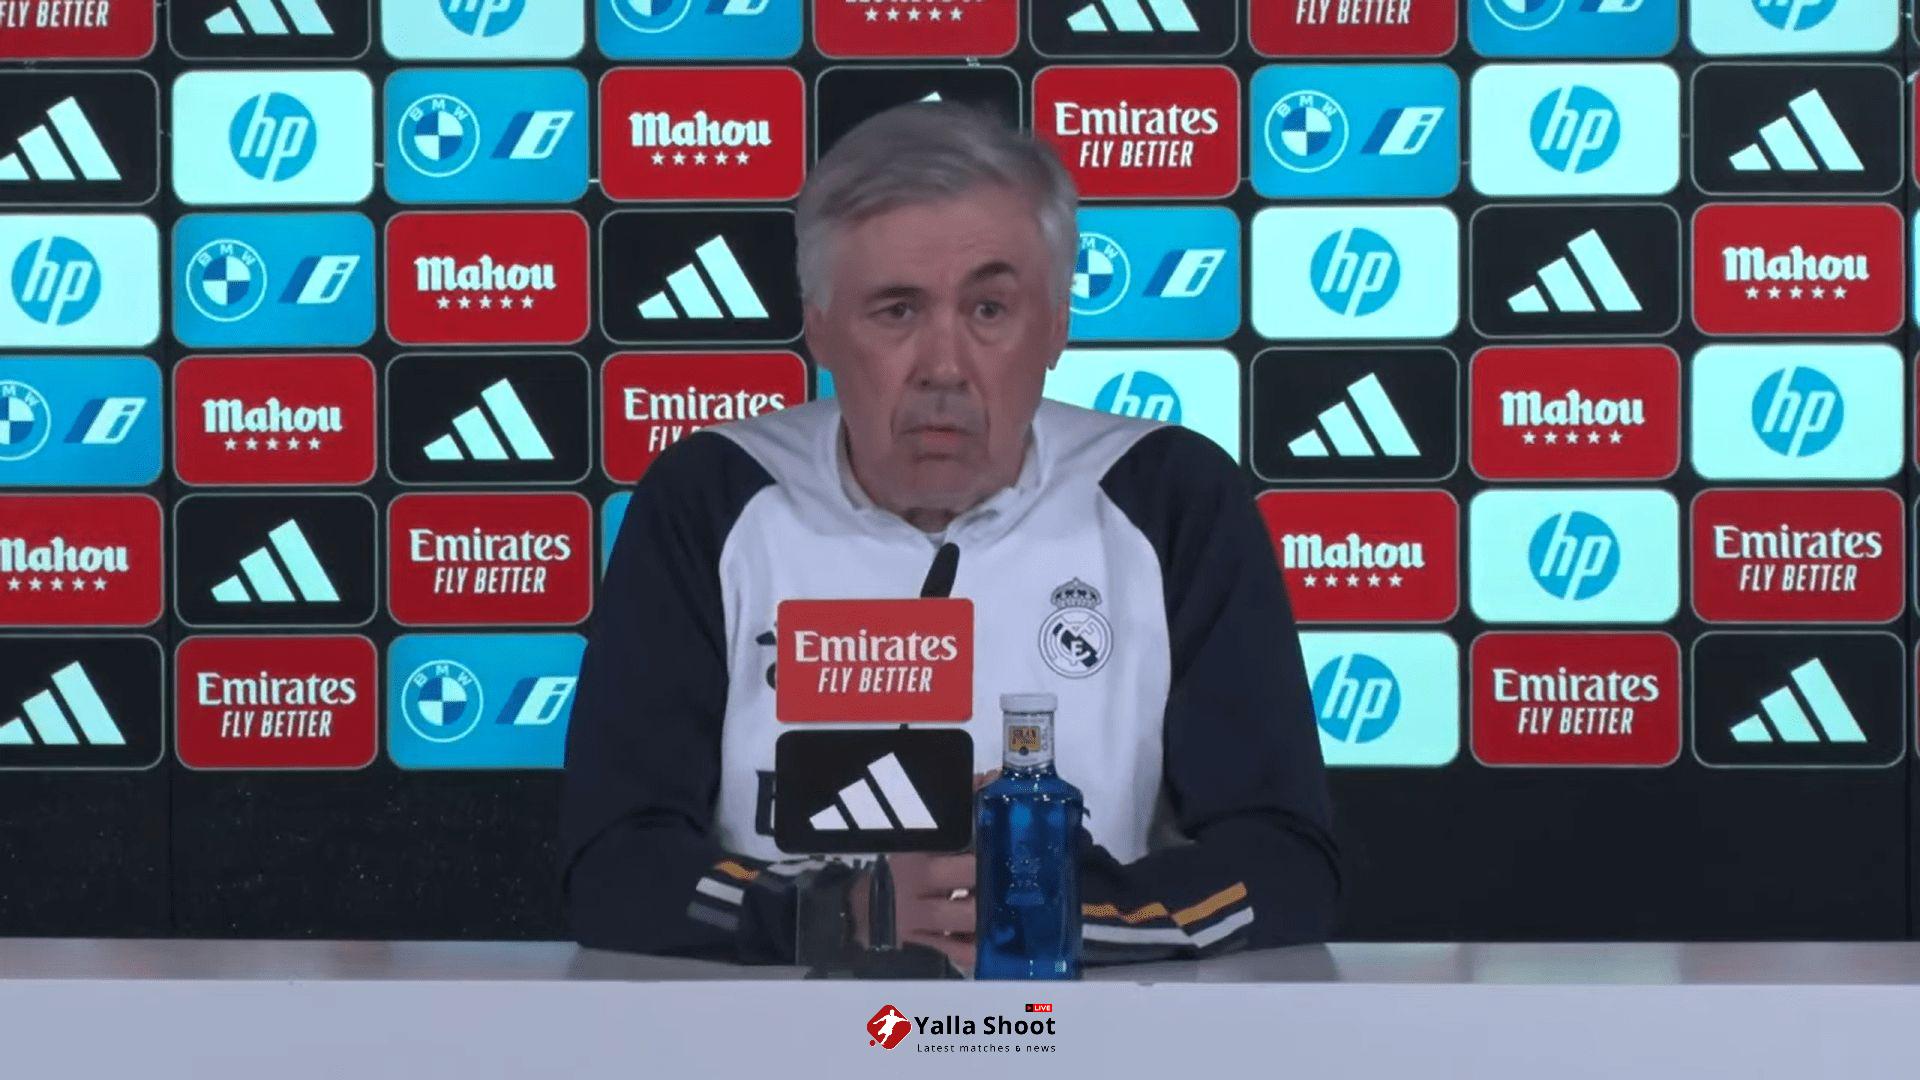 Carlo Ancelotti hits out at Barcelona manager Xavi Hernandez over Real Madrid complaints - "It's not professional"